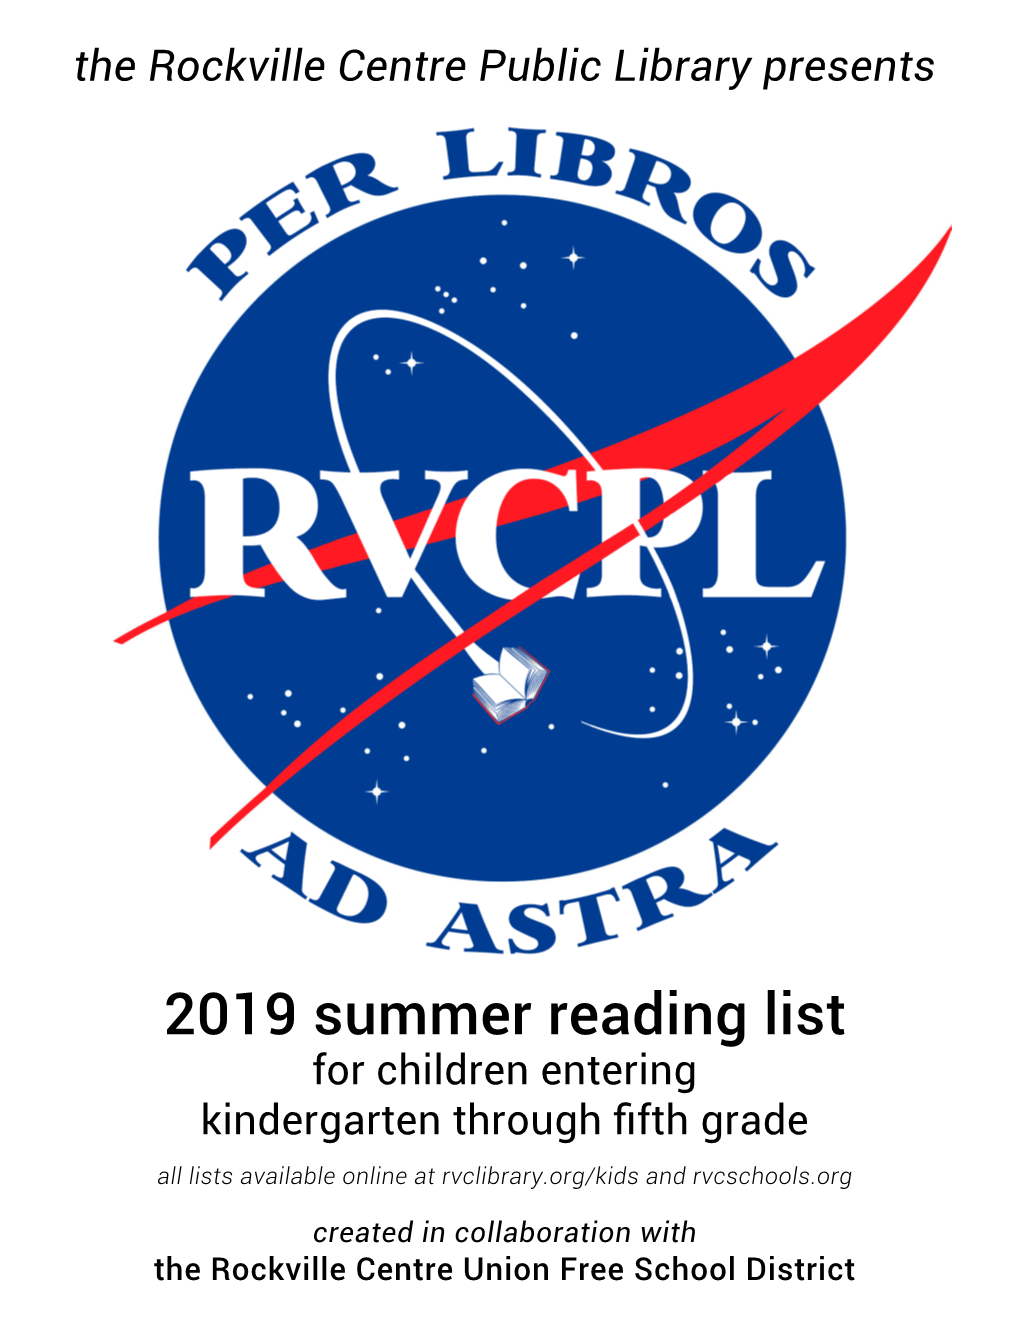 2019 Summer Reading List for Children Entering Kindergarten Through ﬁfth Grade All Lists Available Online at Rvclibrary.Org/Kids and Rvcschools.Org